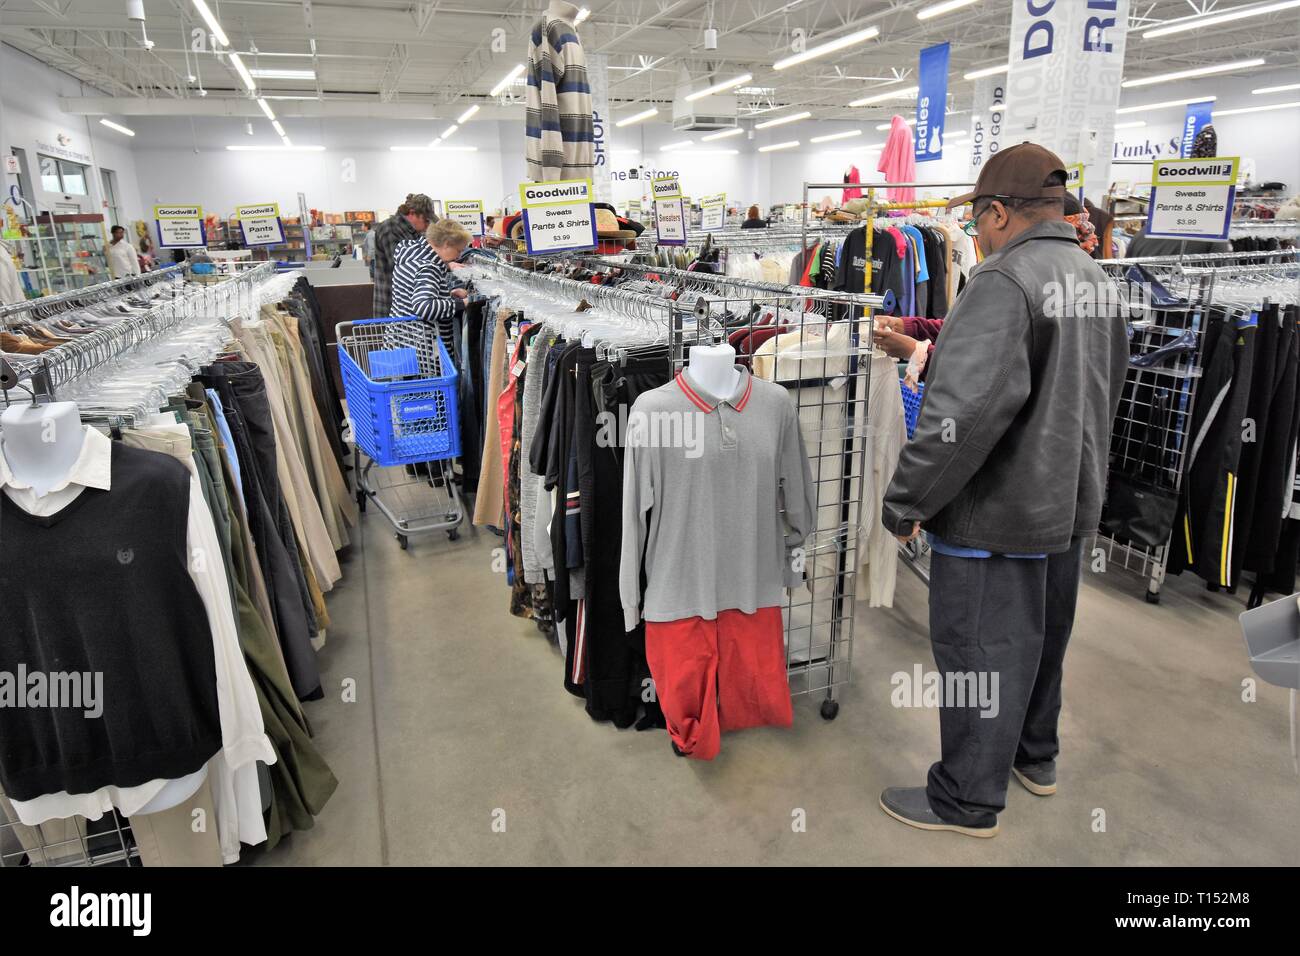 https://c8.alamy.com/comp/T152M8/used-clothing-for-sale-at-a-good-price-and-of-good-quality-for-family-T152M8.jpg